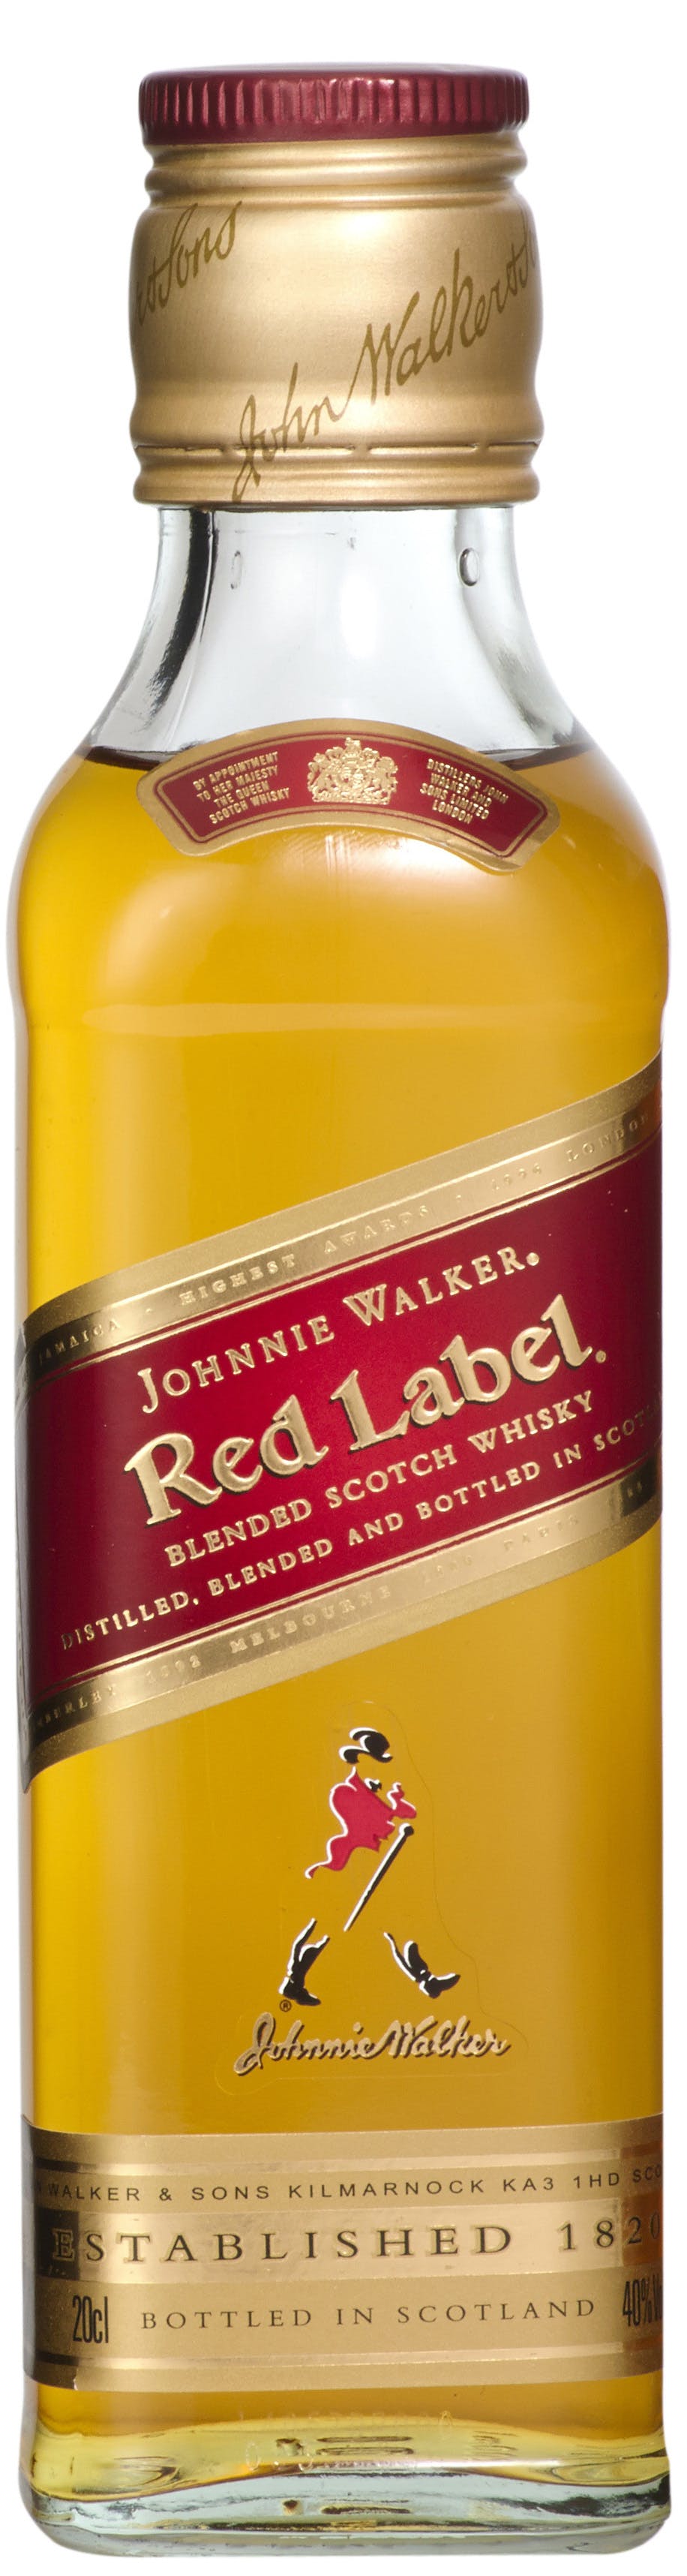 200ml Red Johnnie Blended Liquors Avenue Scotch Walker Label Whisky - Central